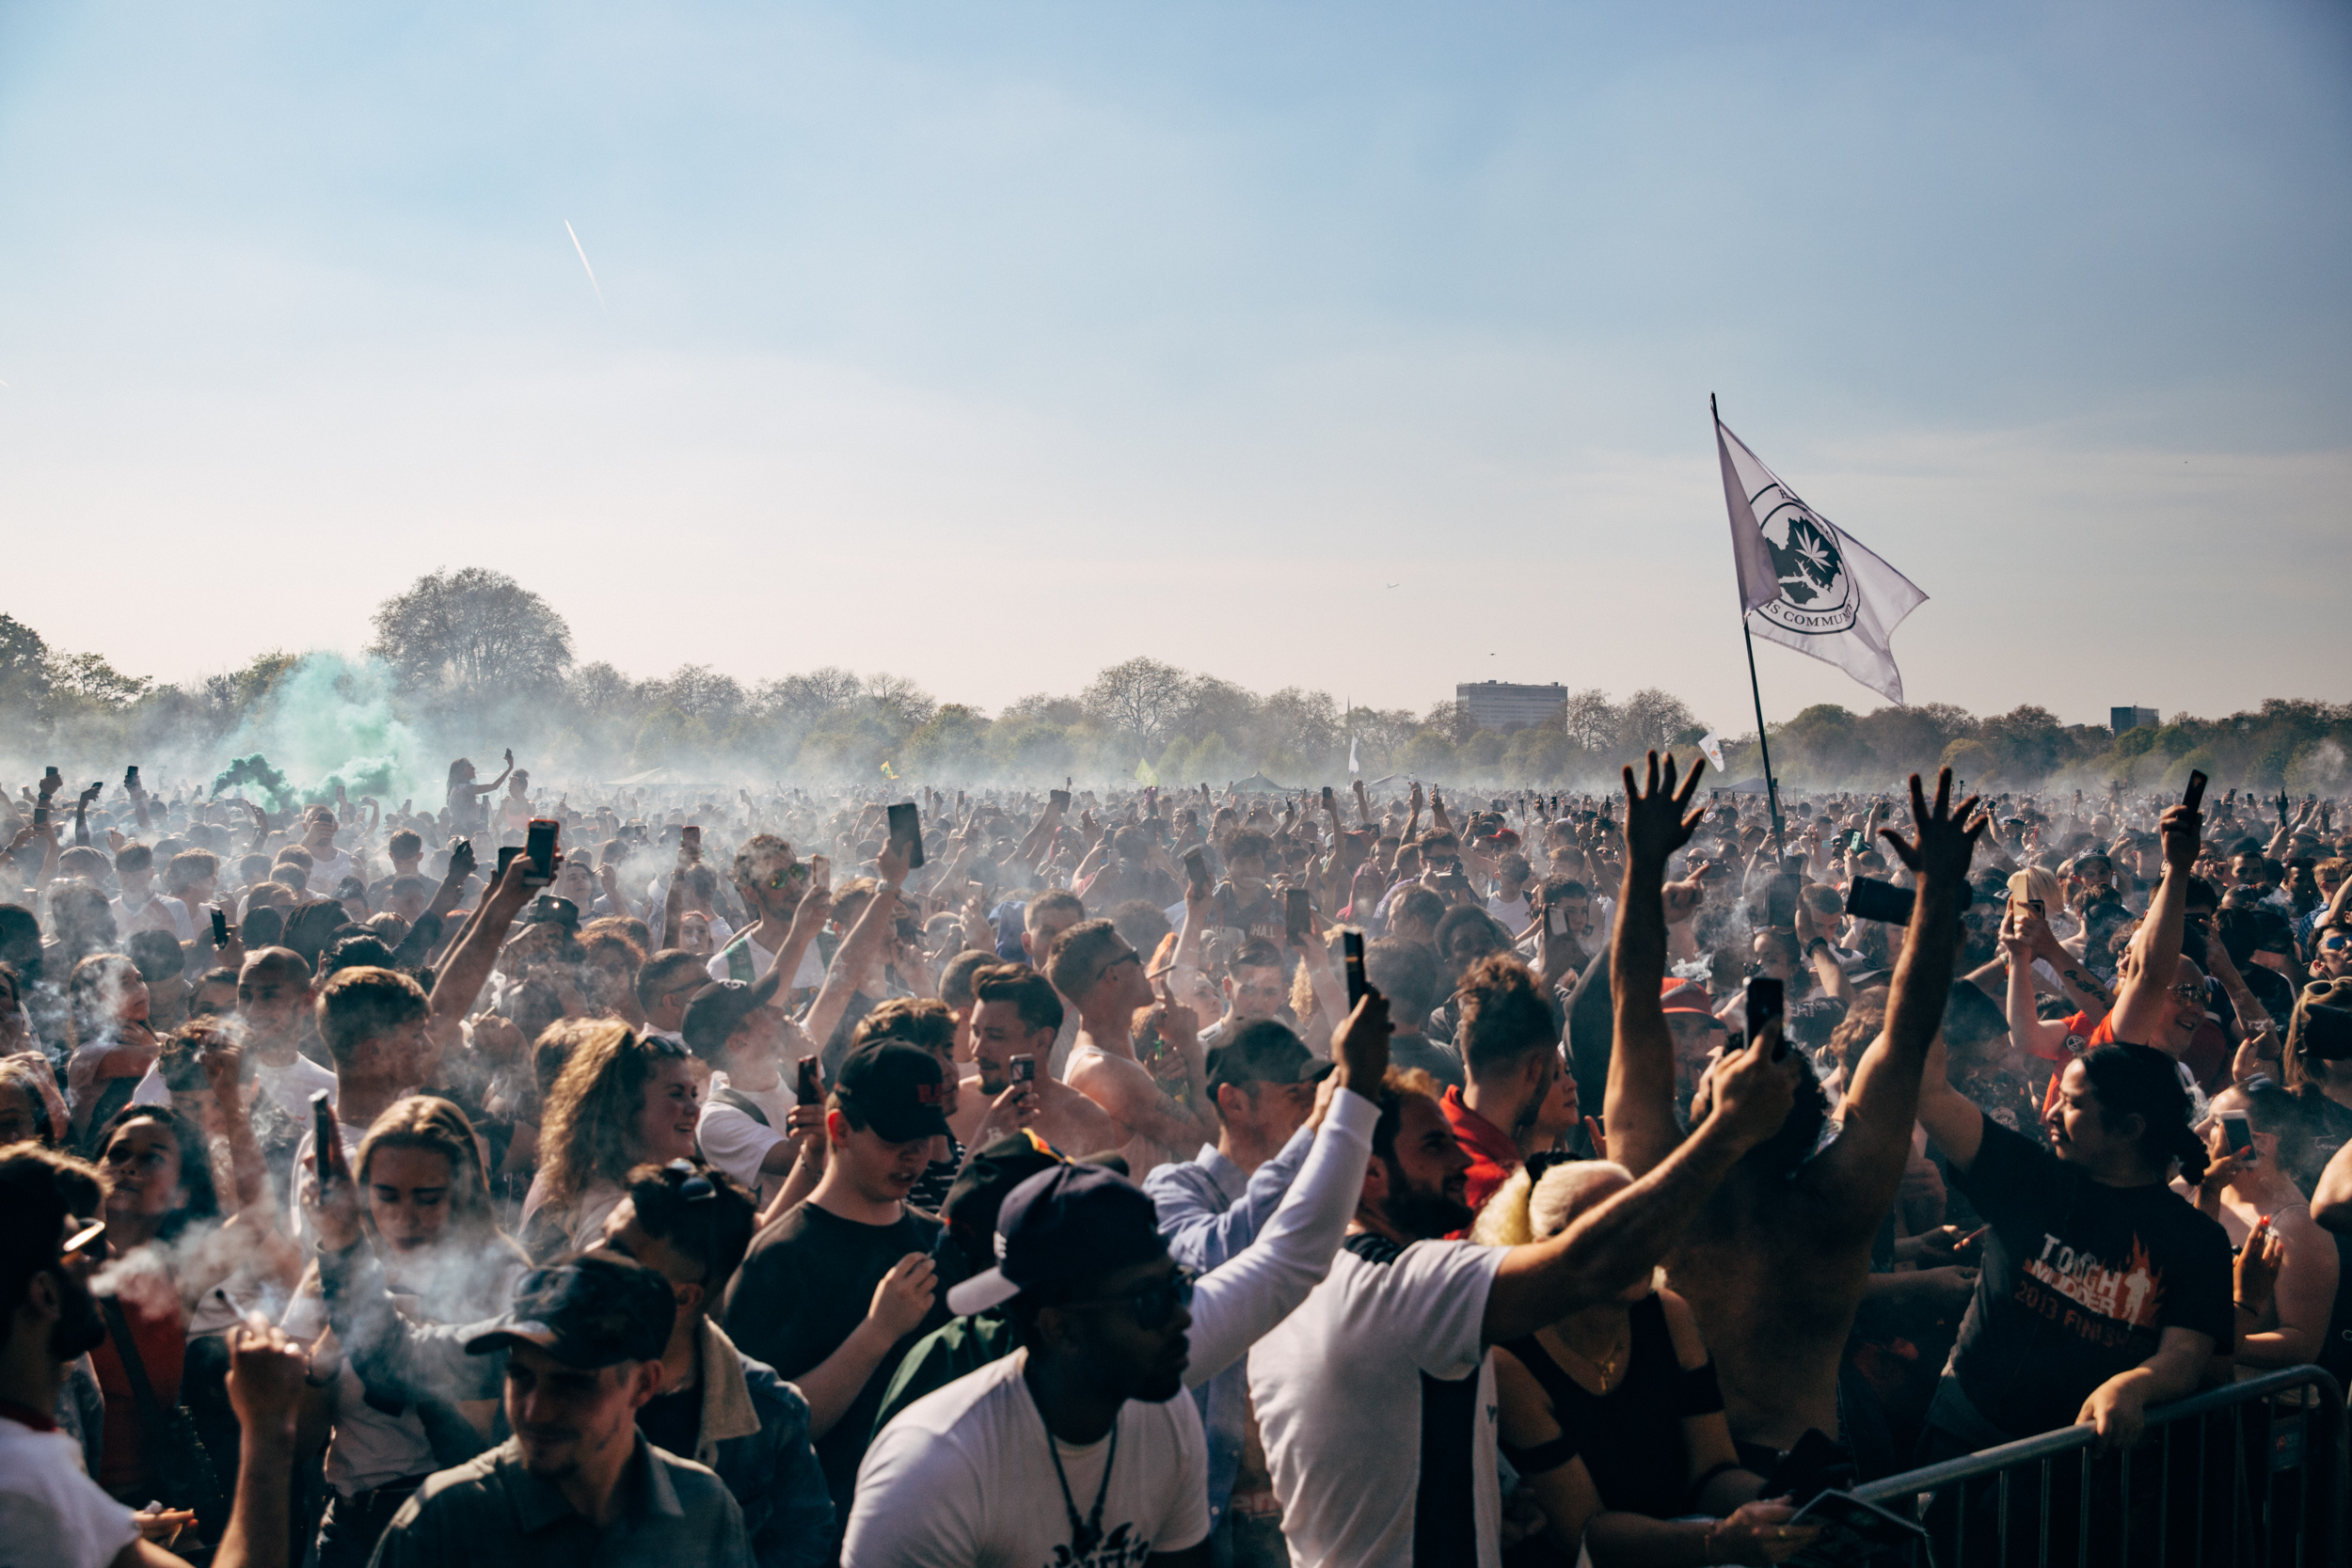 Photos from This Year's 4/20 SmokeUp in Hyde Park VICE